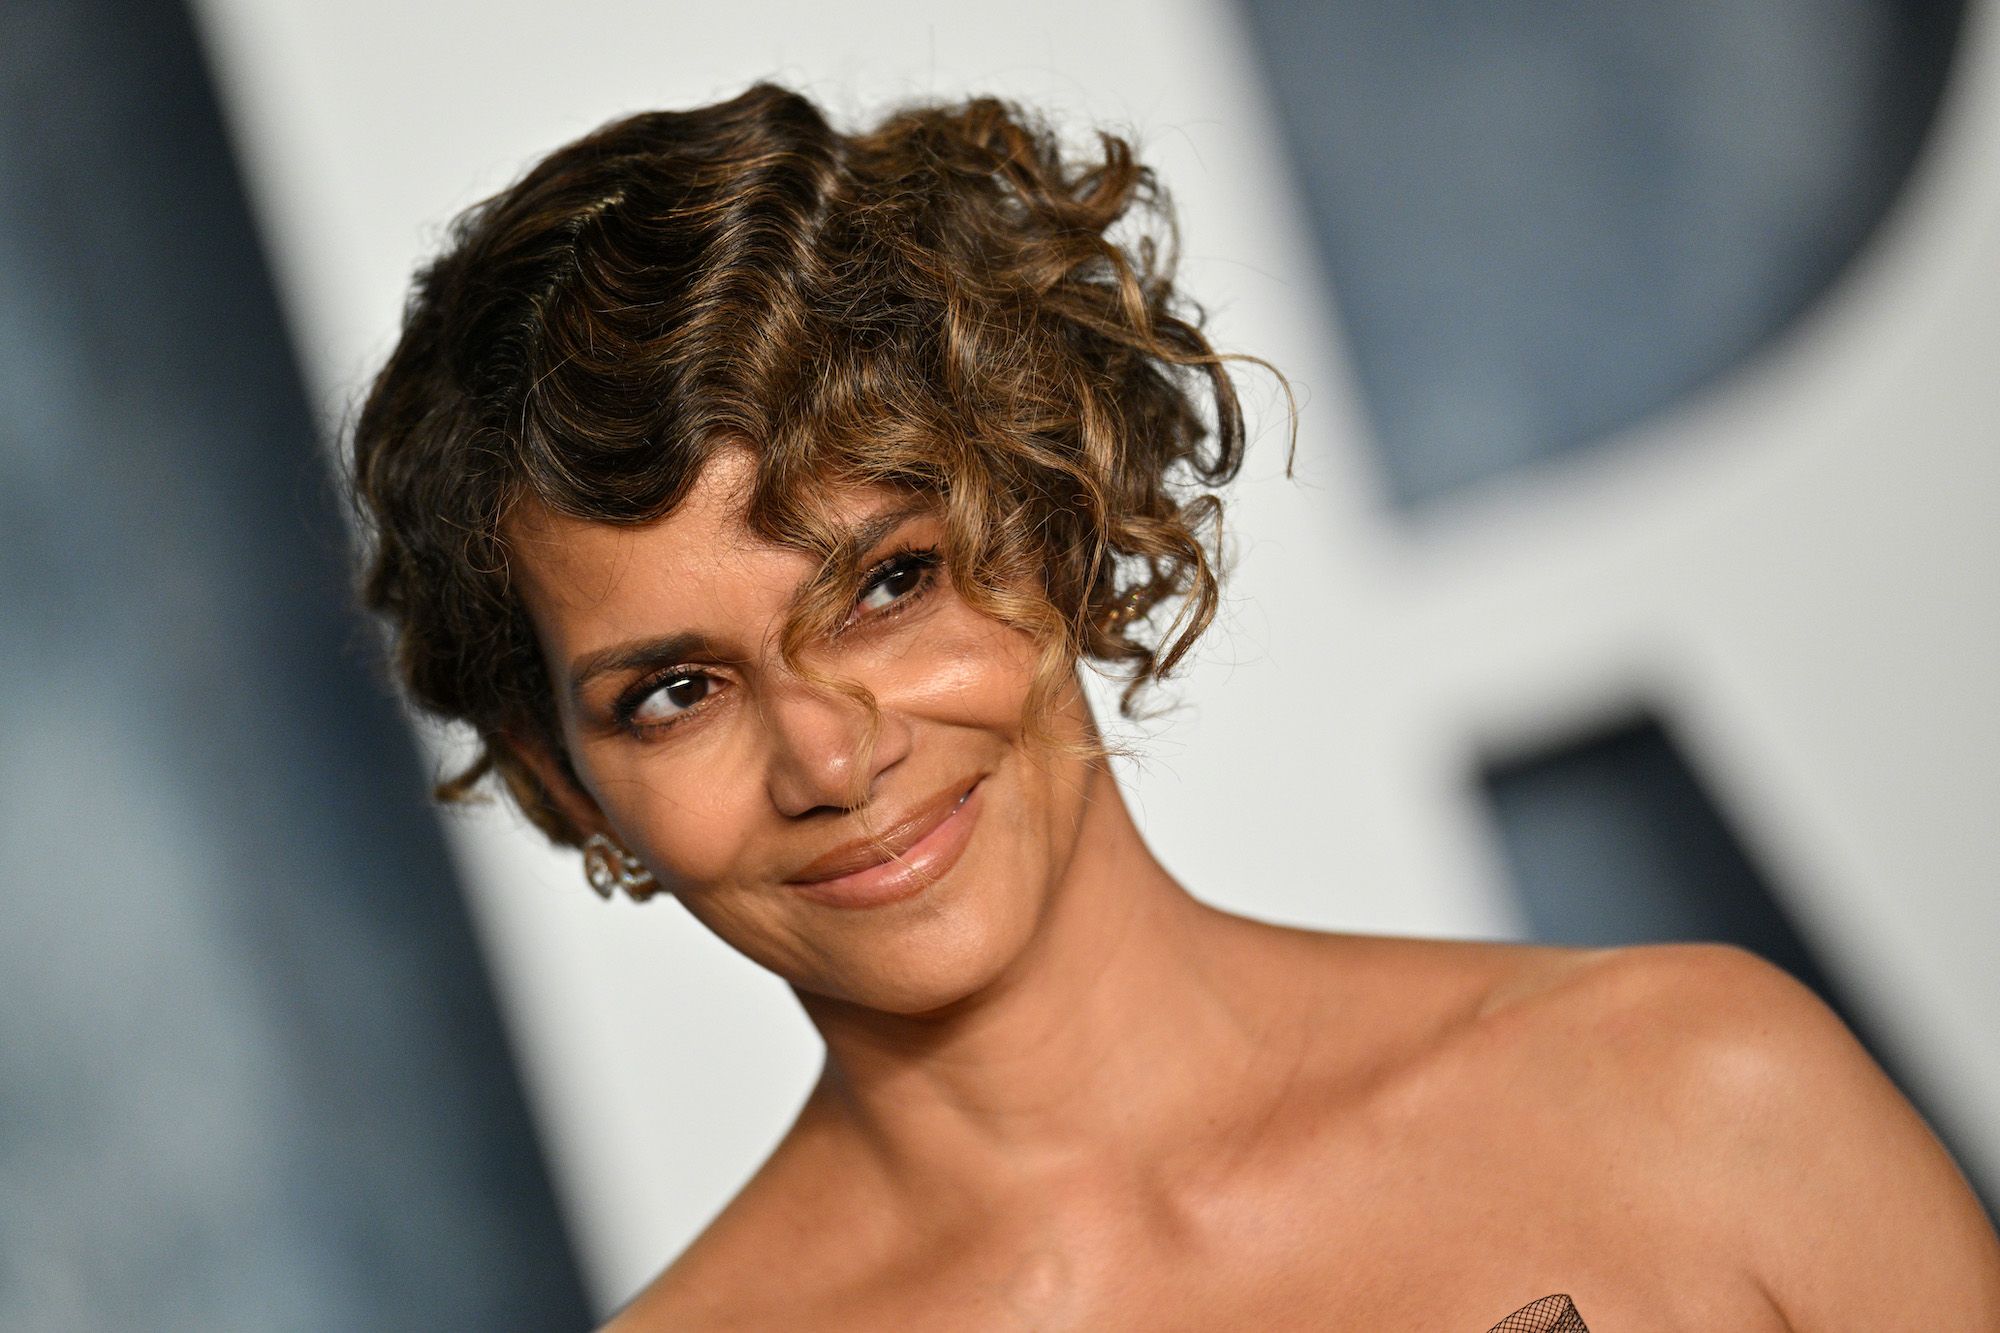 Halle Berry Poses Nude While Drinking Wine on Her Balcony In New image